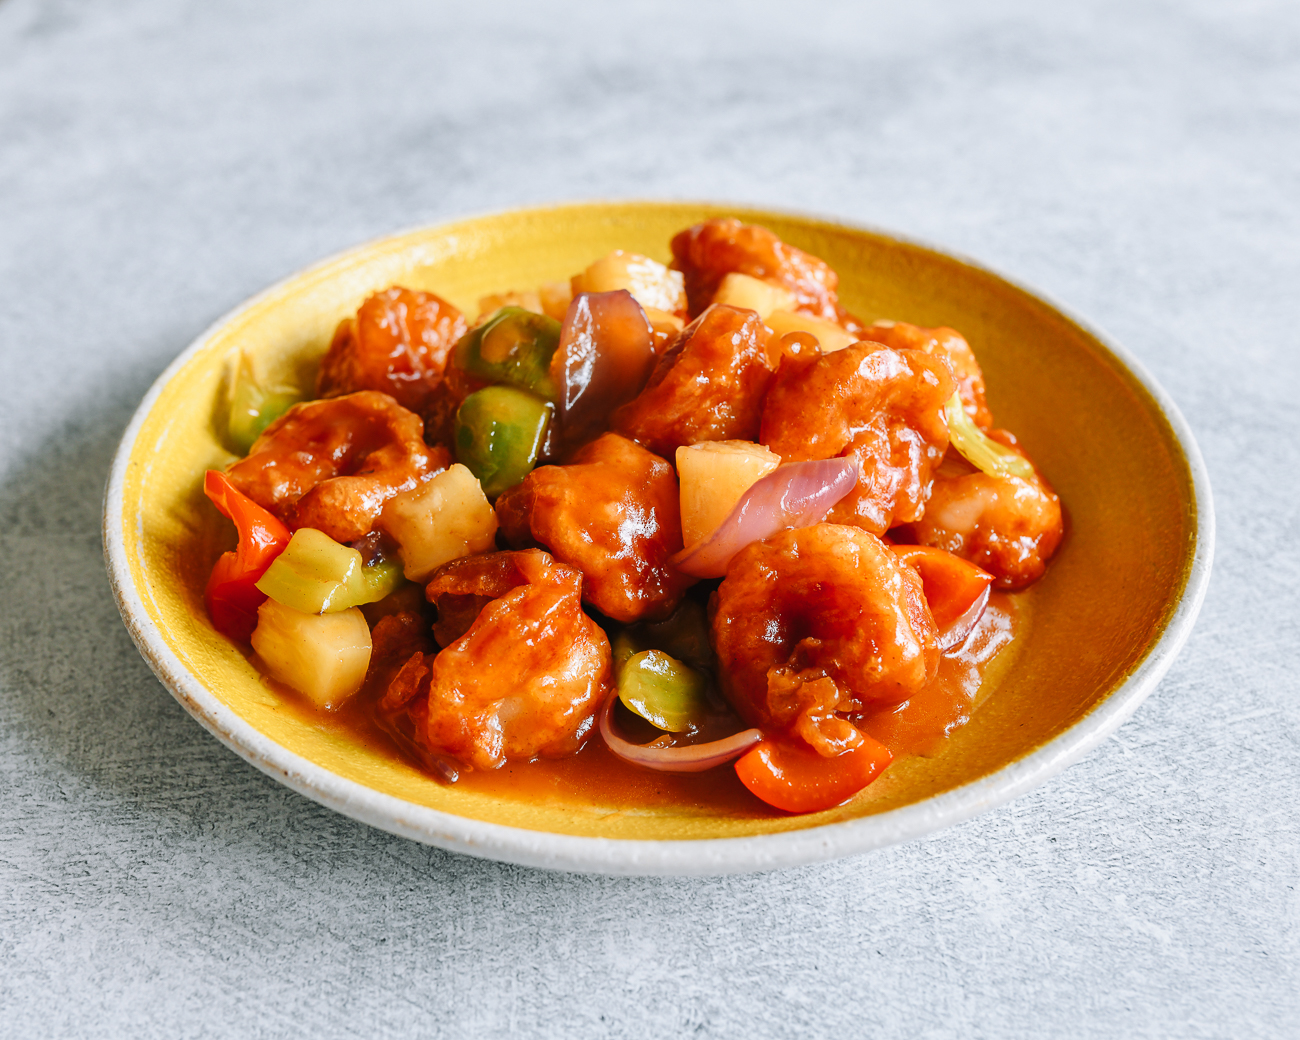 Plate of Sweet and Sour Shrimp